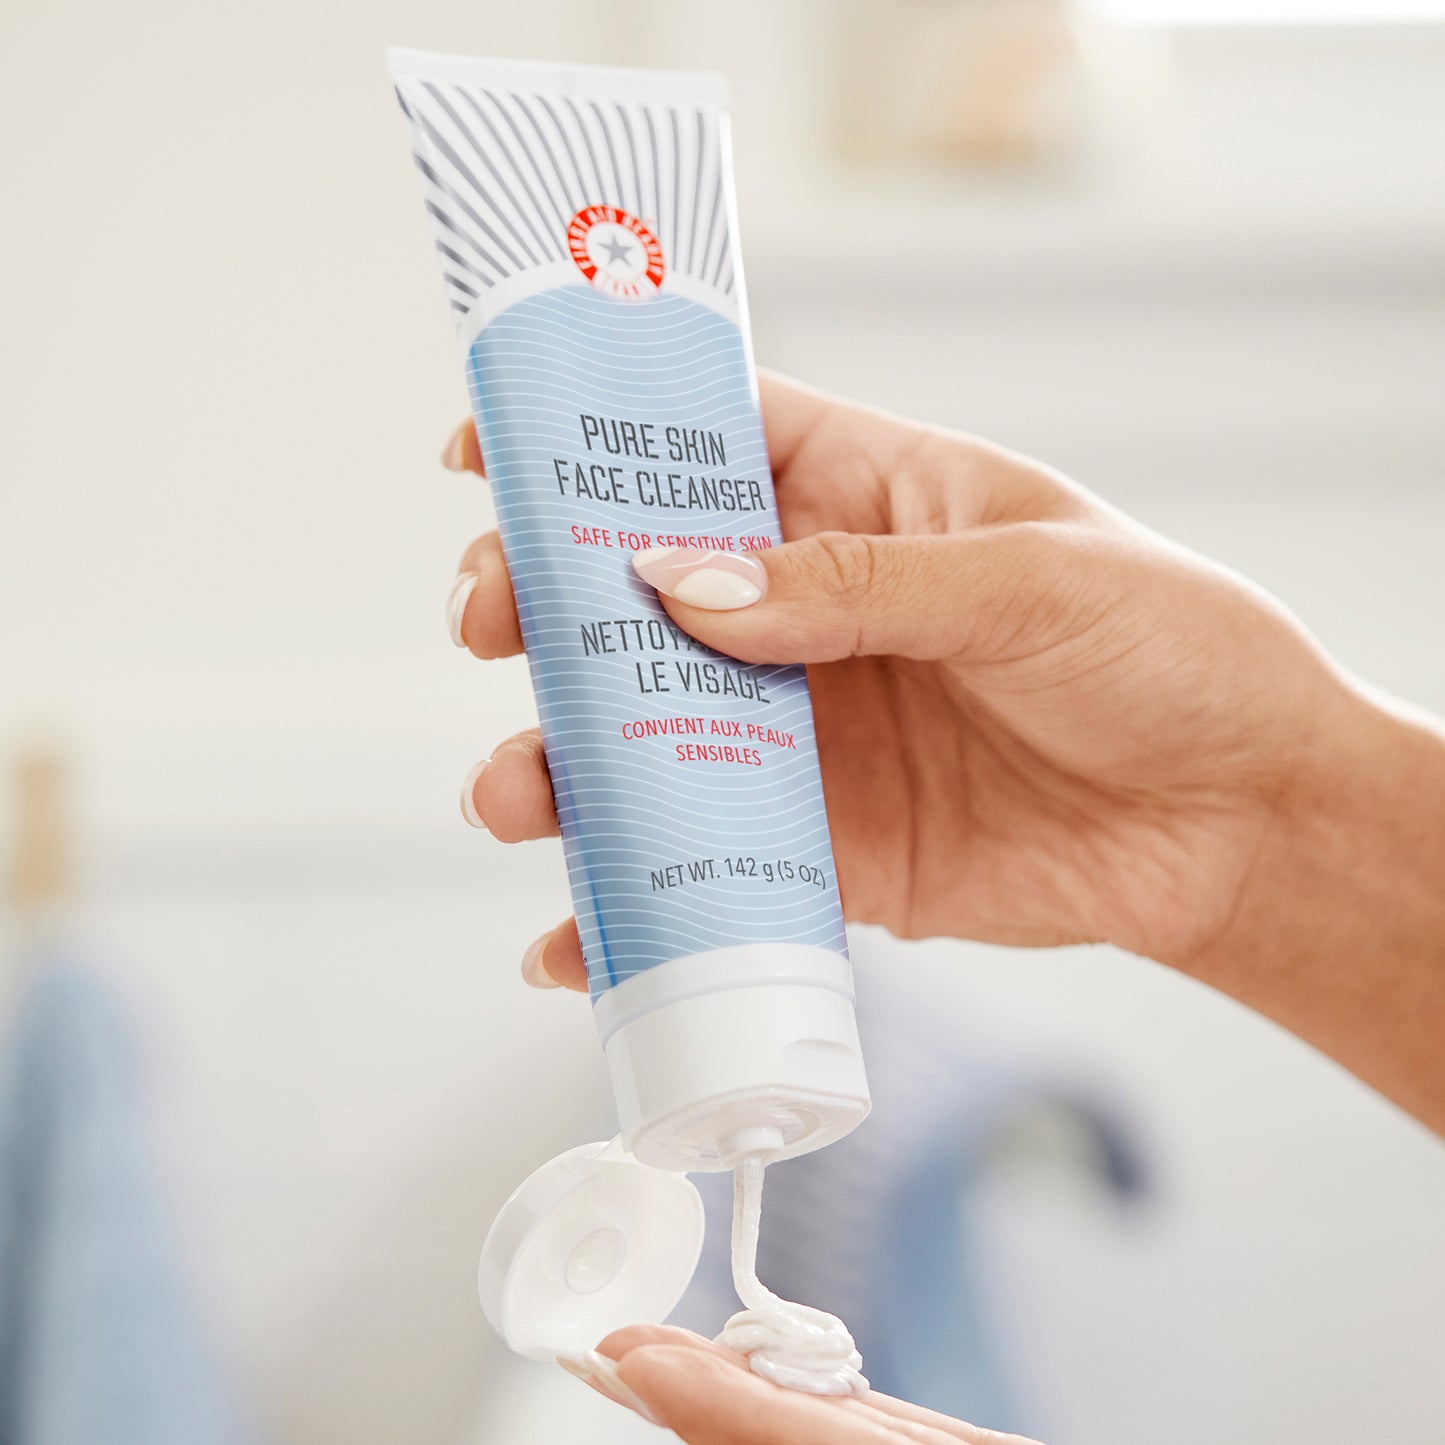 Model dispensing Face Cleanser into hand